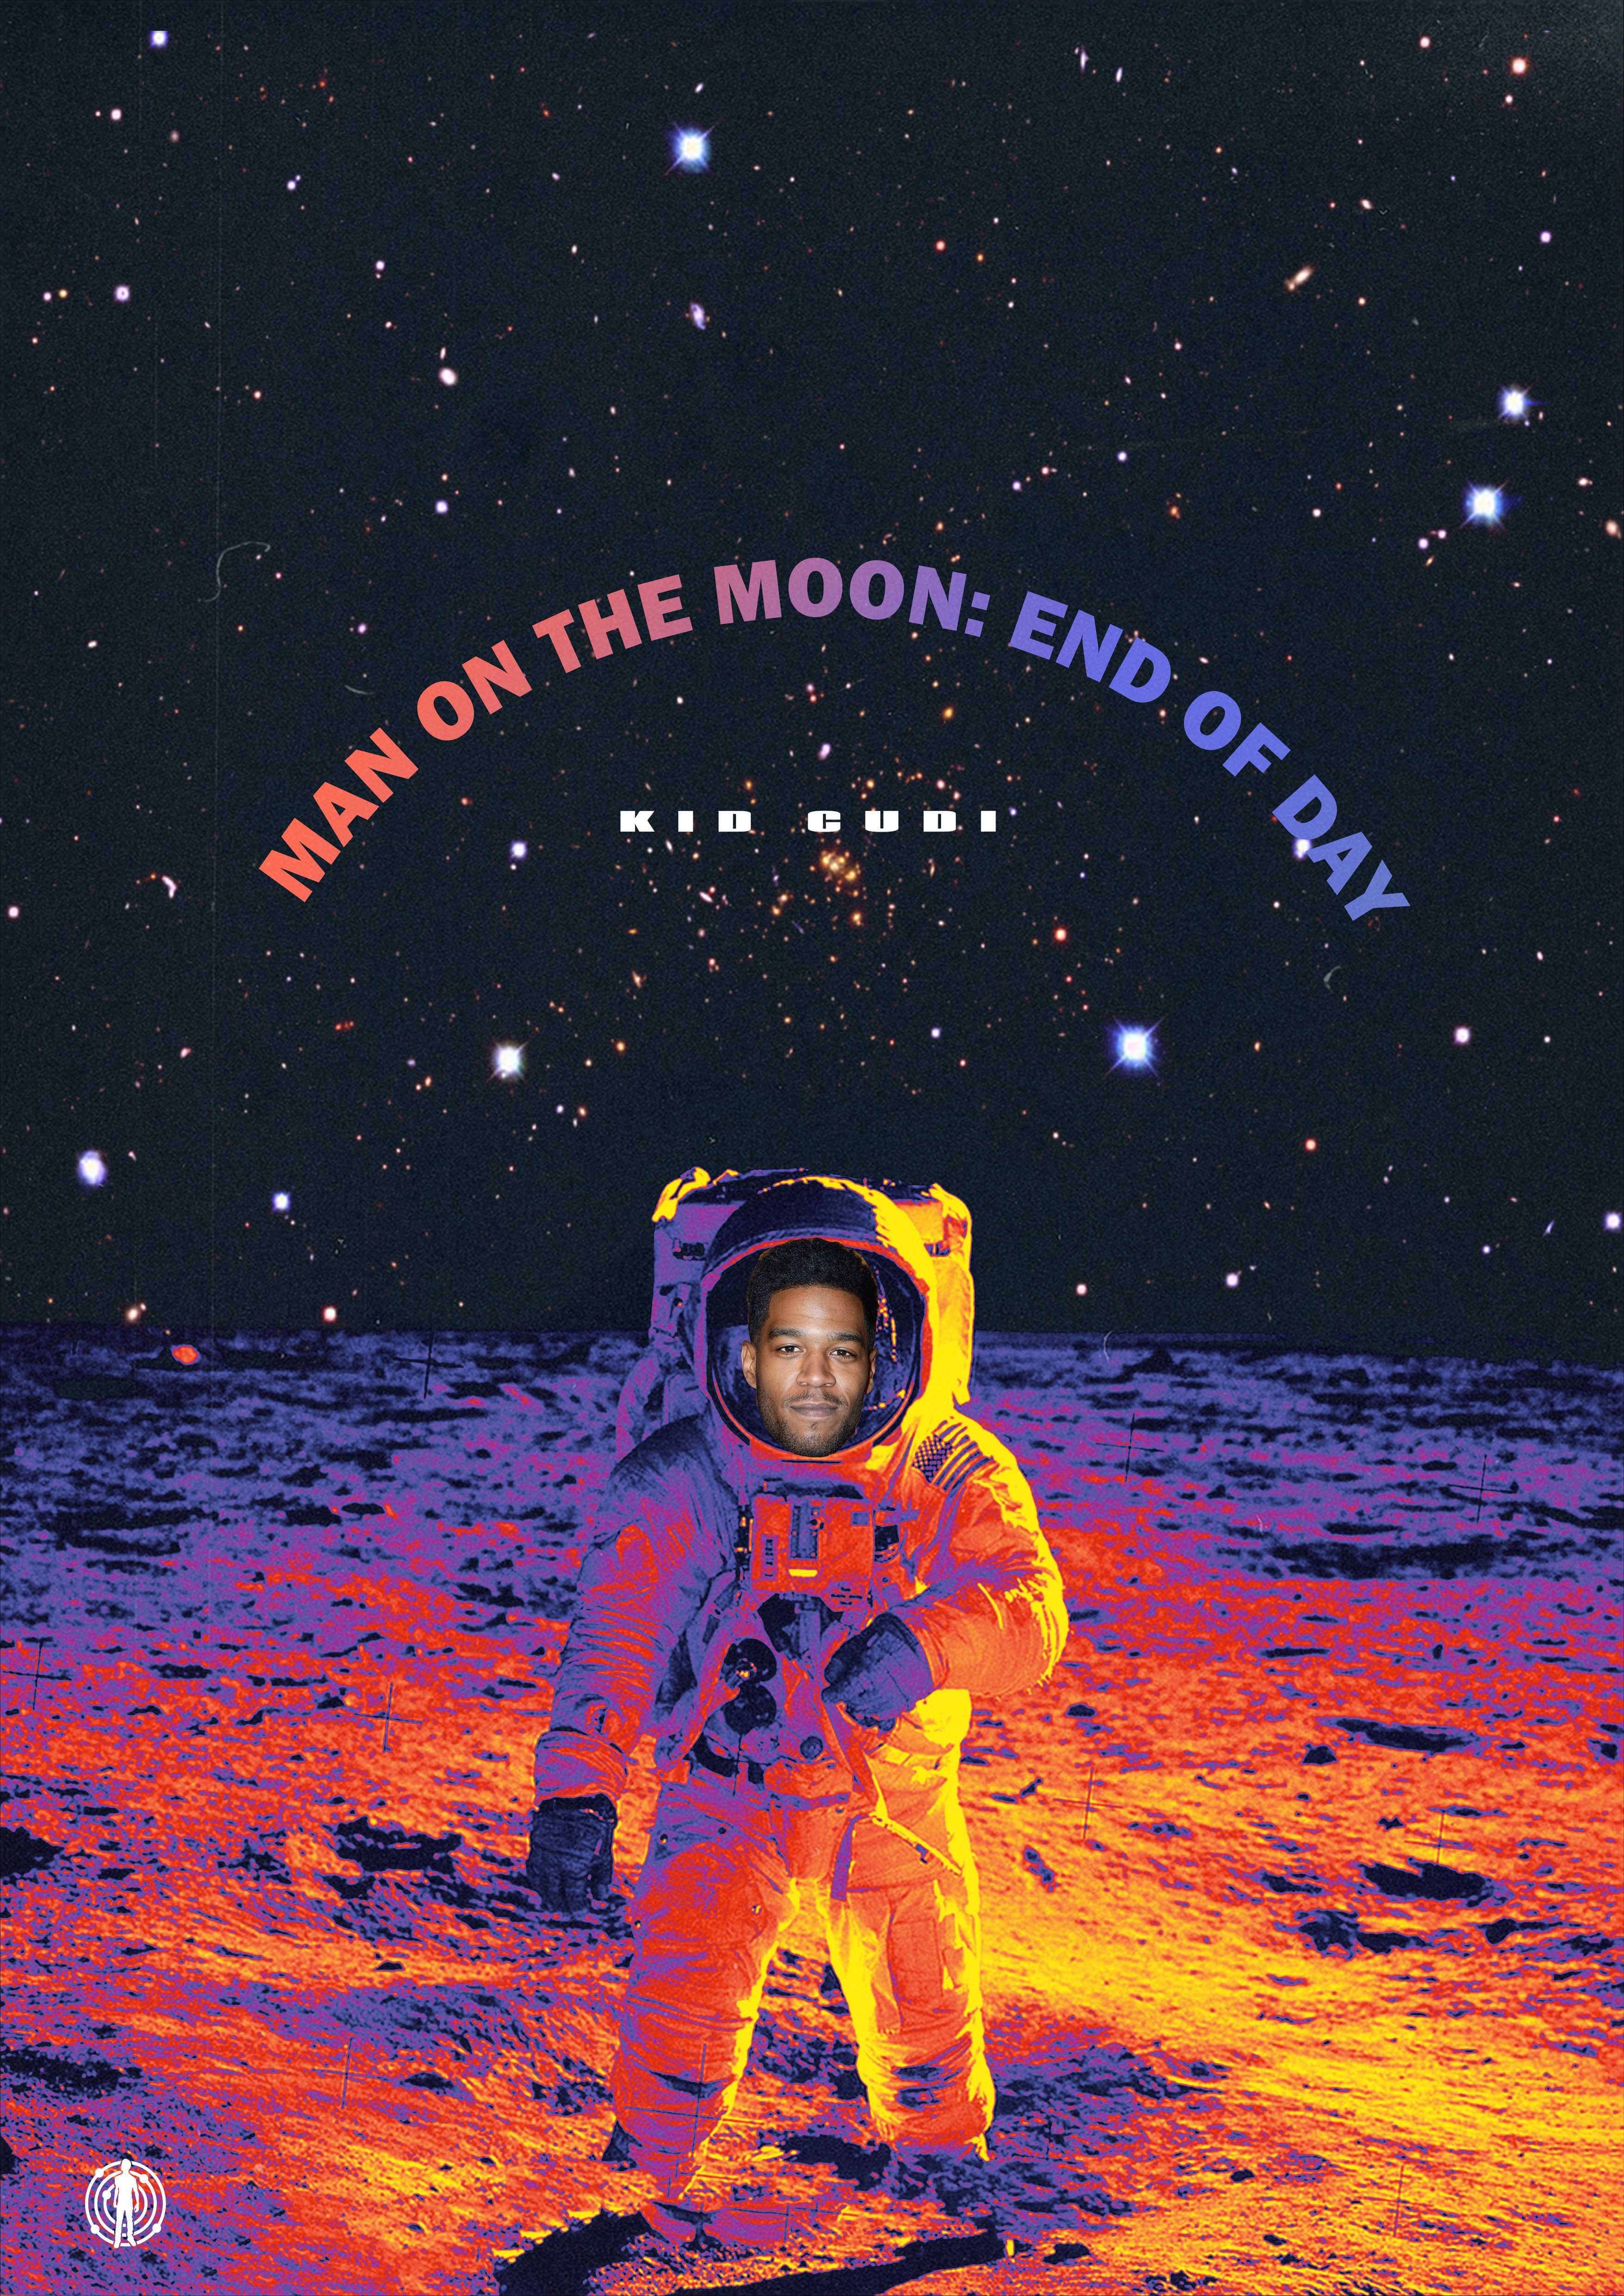 Man On The Moon 3 Wallpapers - Wallpaper Cave